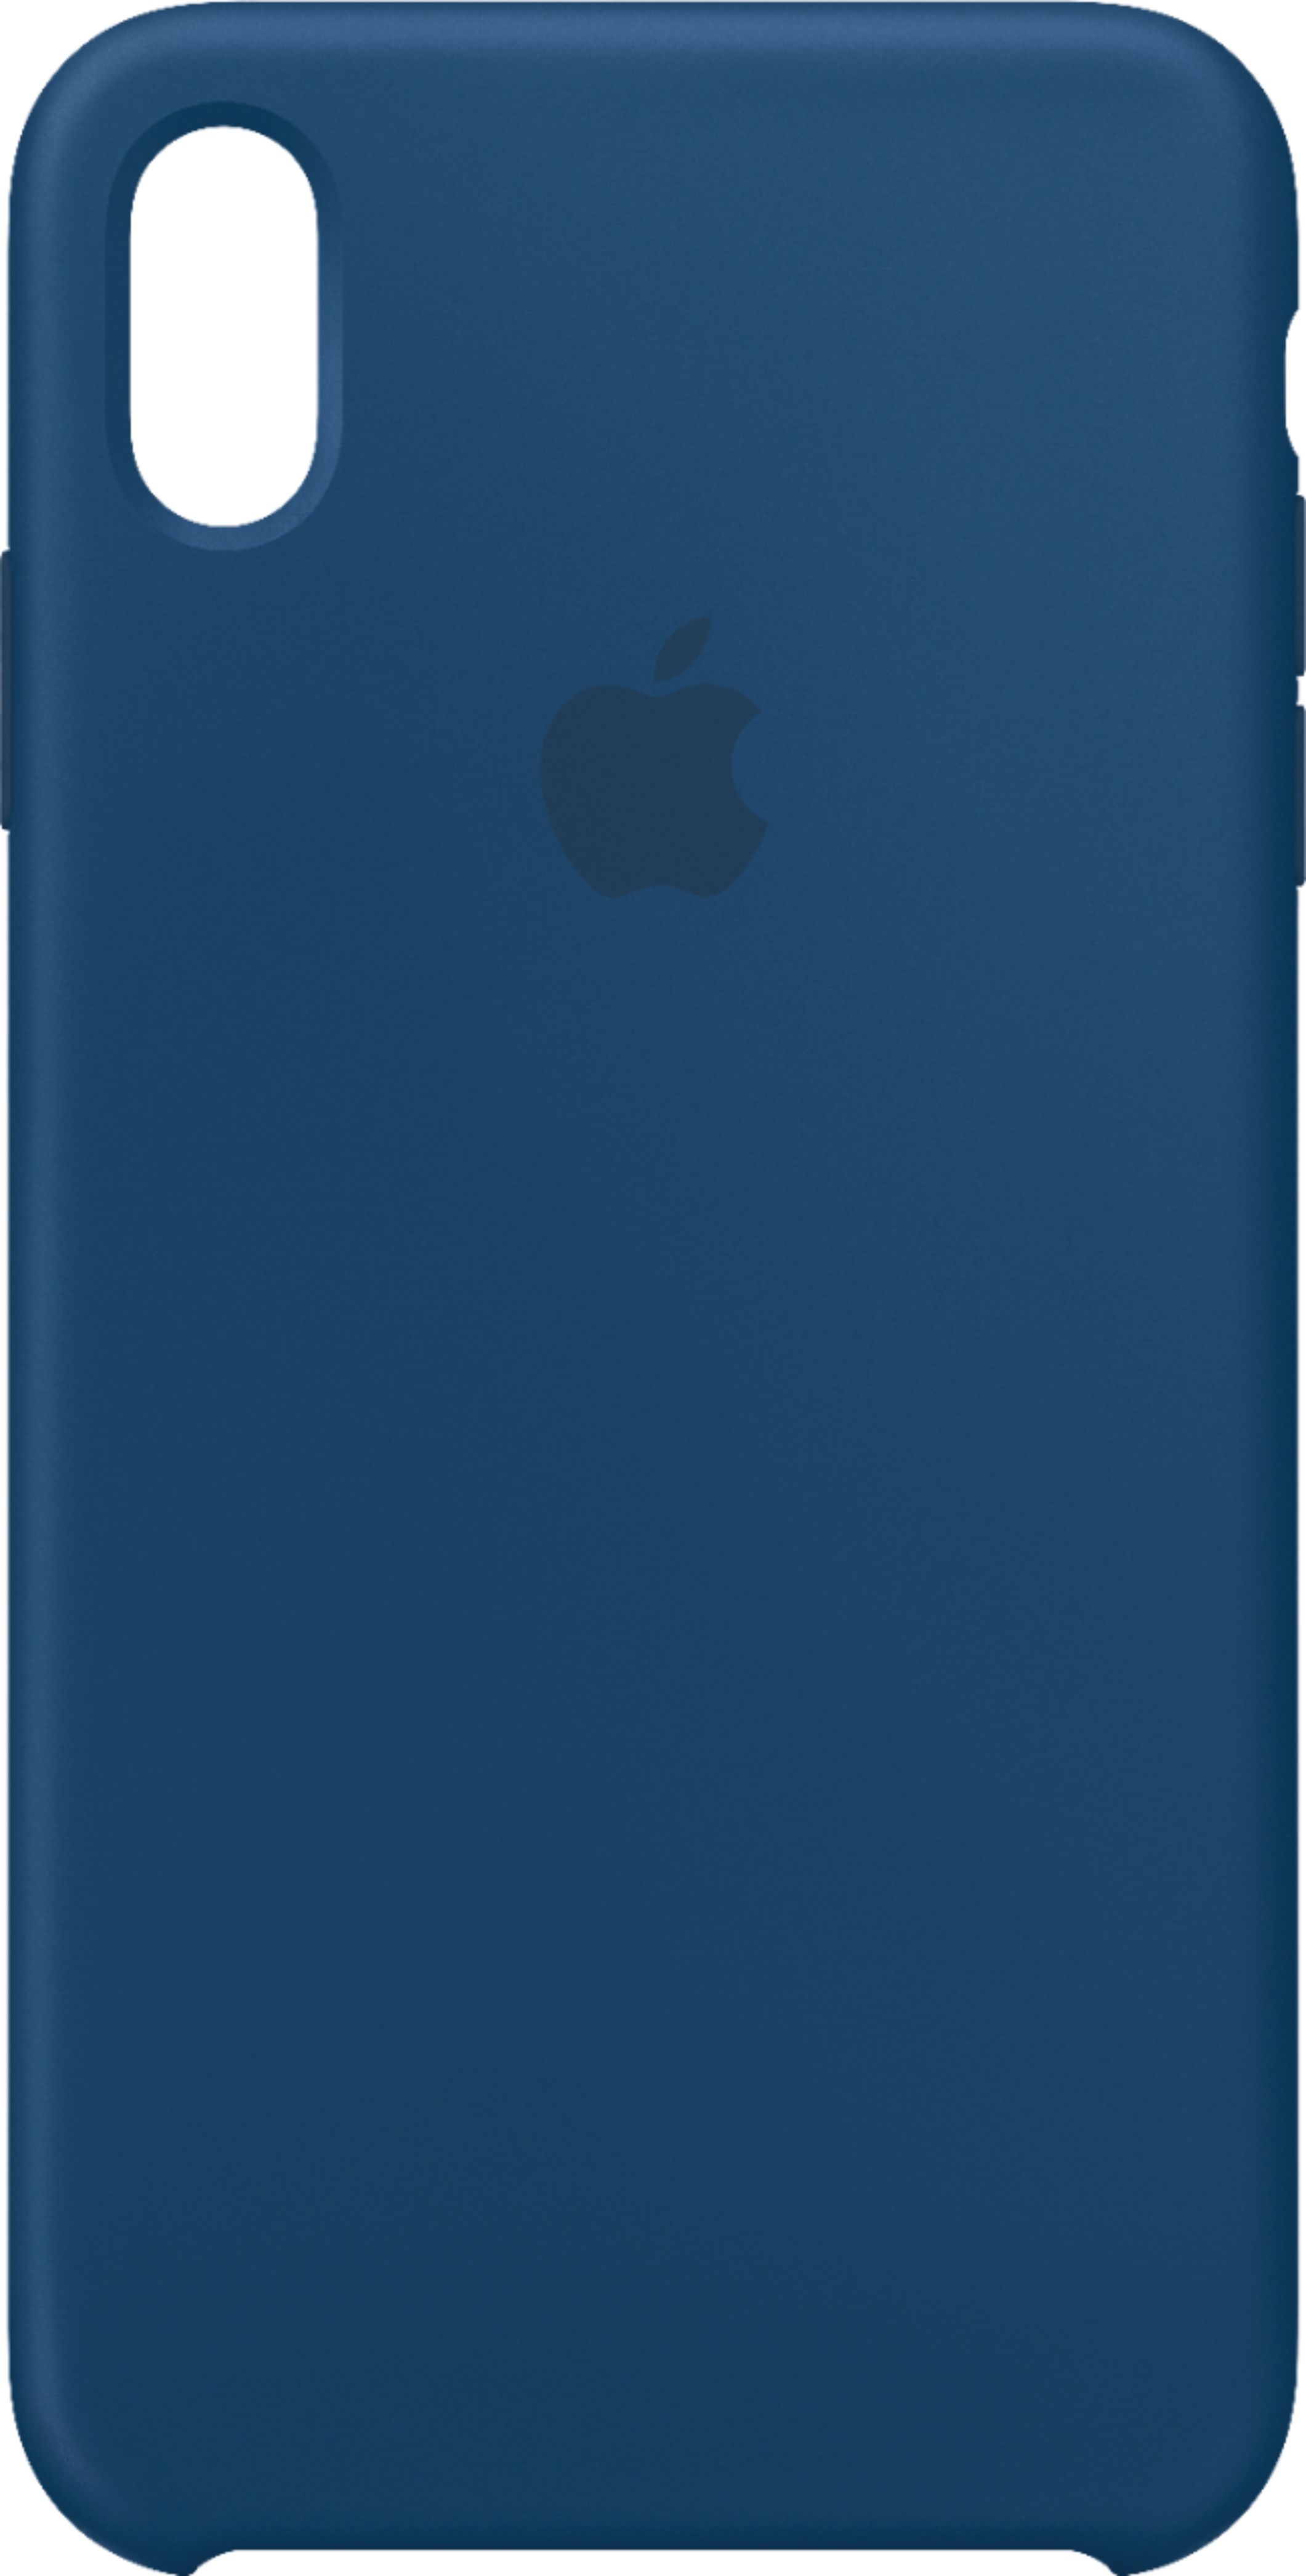 Best Buy Apple Iphone Xs Max Silicone Case Blue Horizon Mtfe2zm A